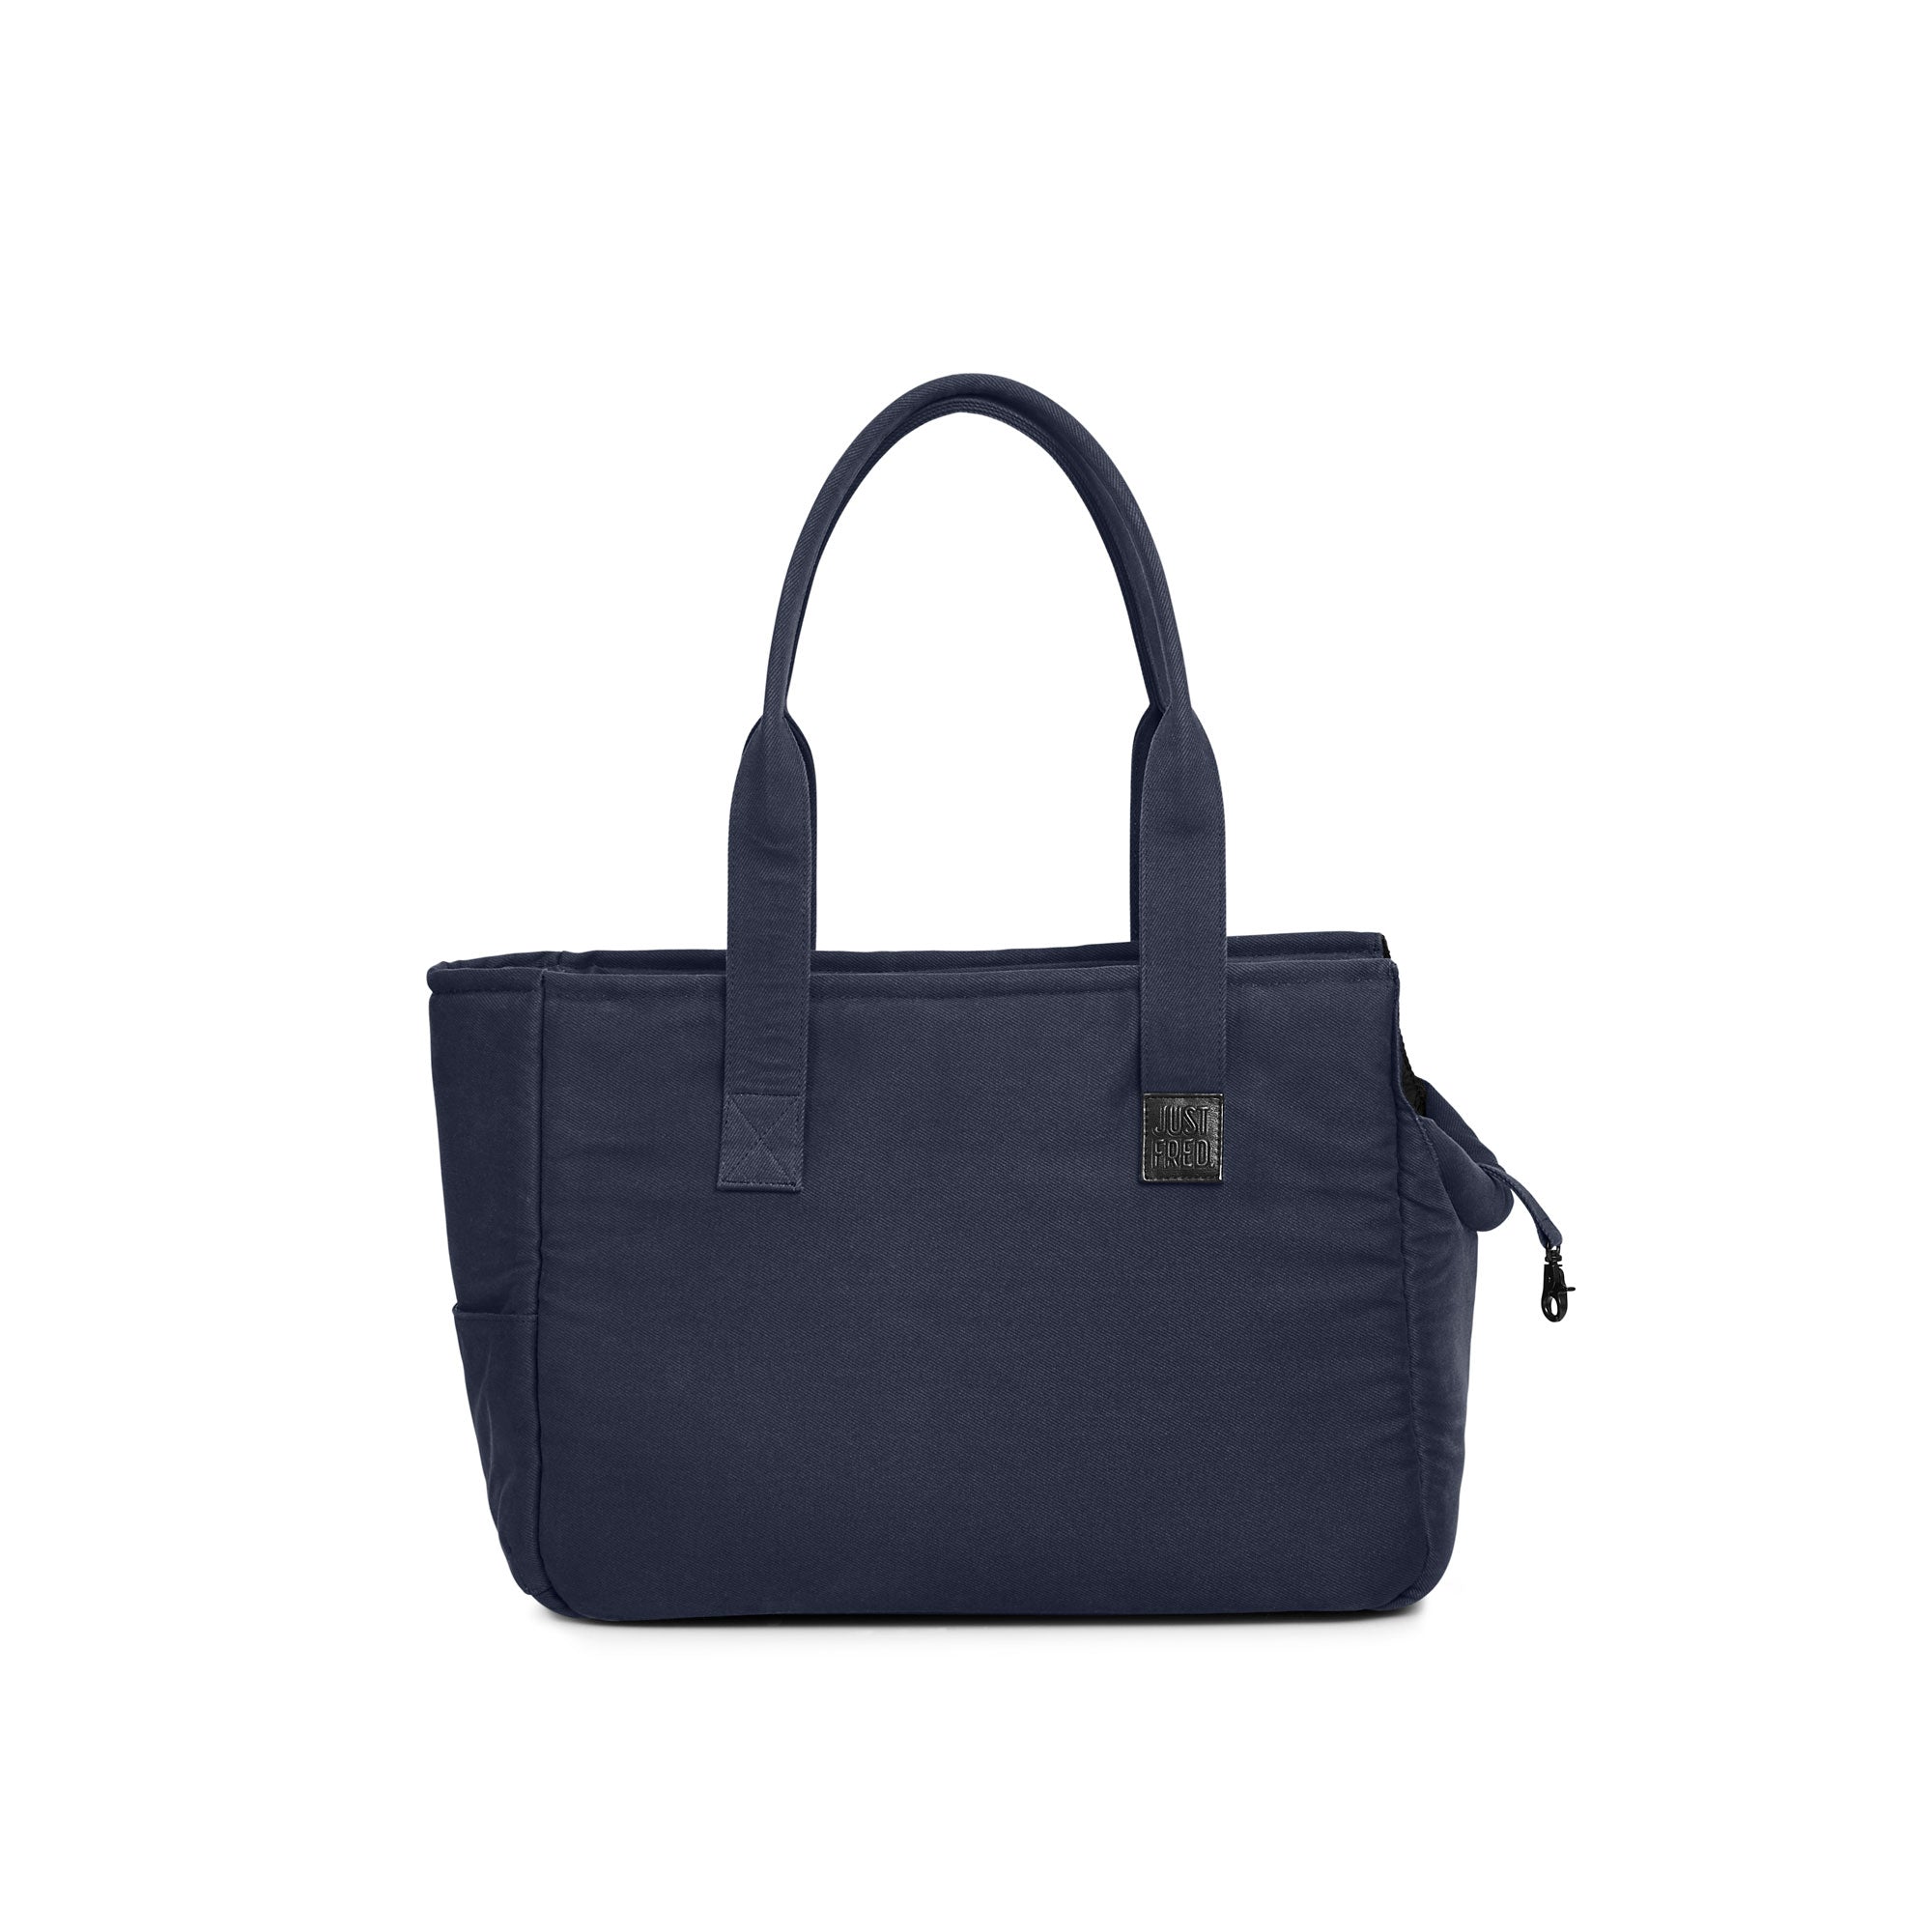 Just Fred Weekend Dog Tote - Blue - L